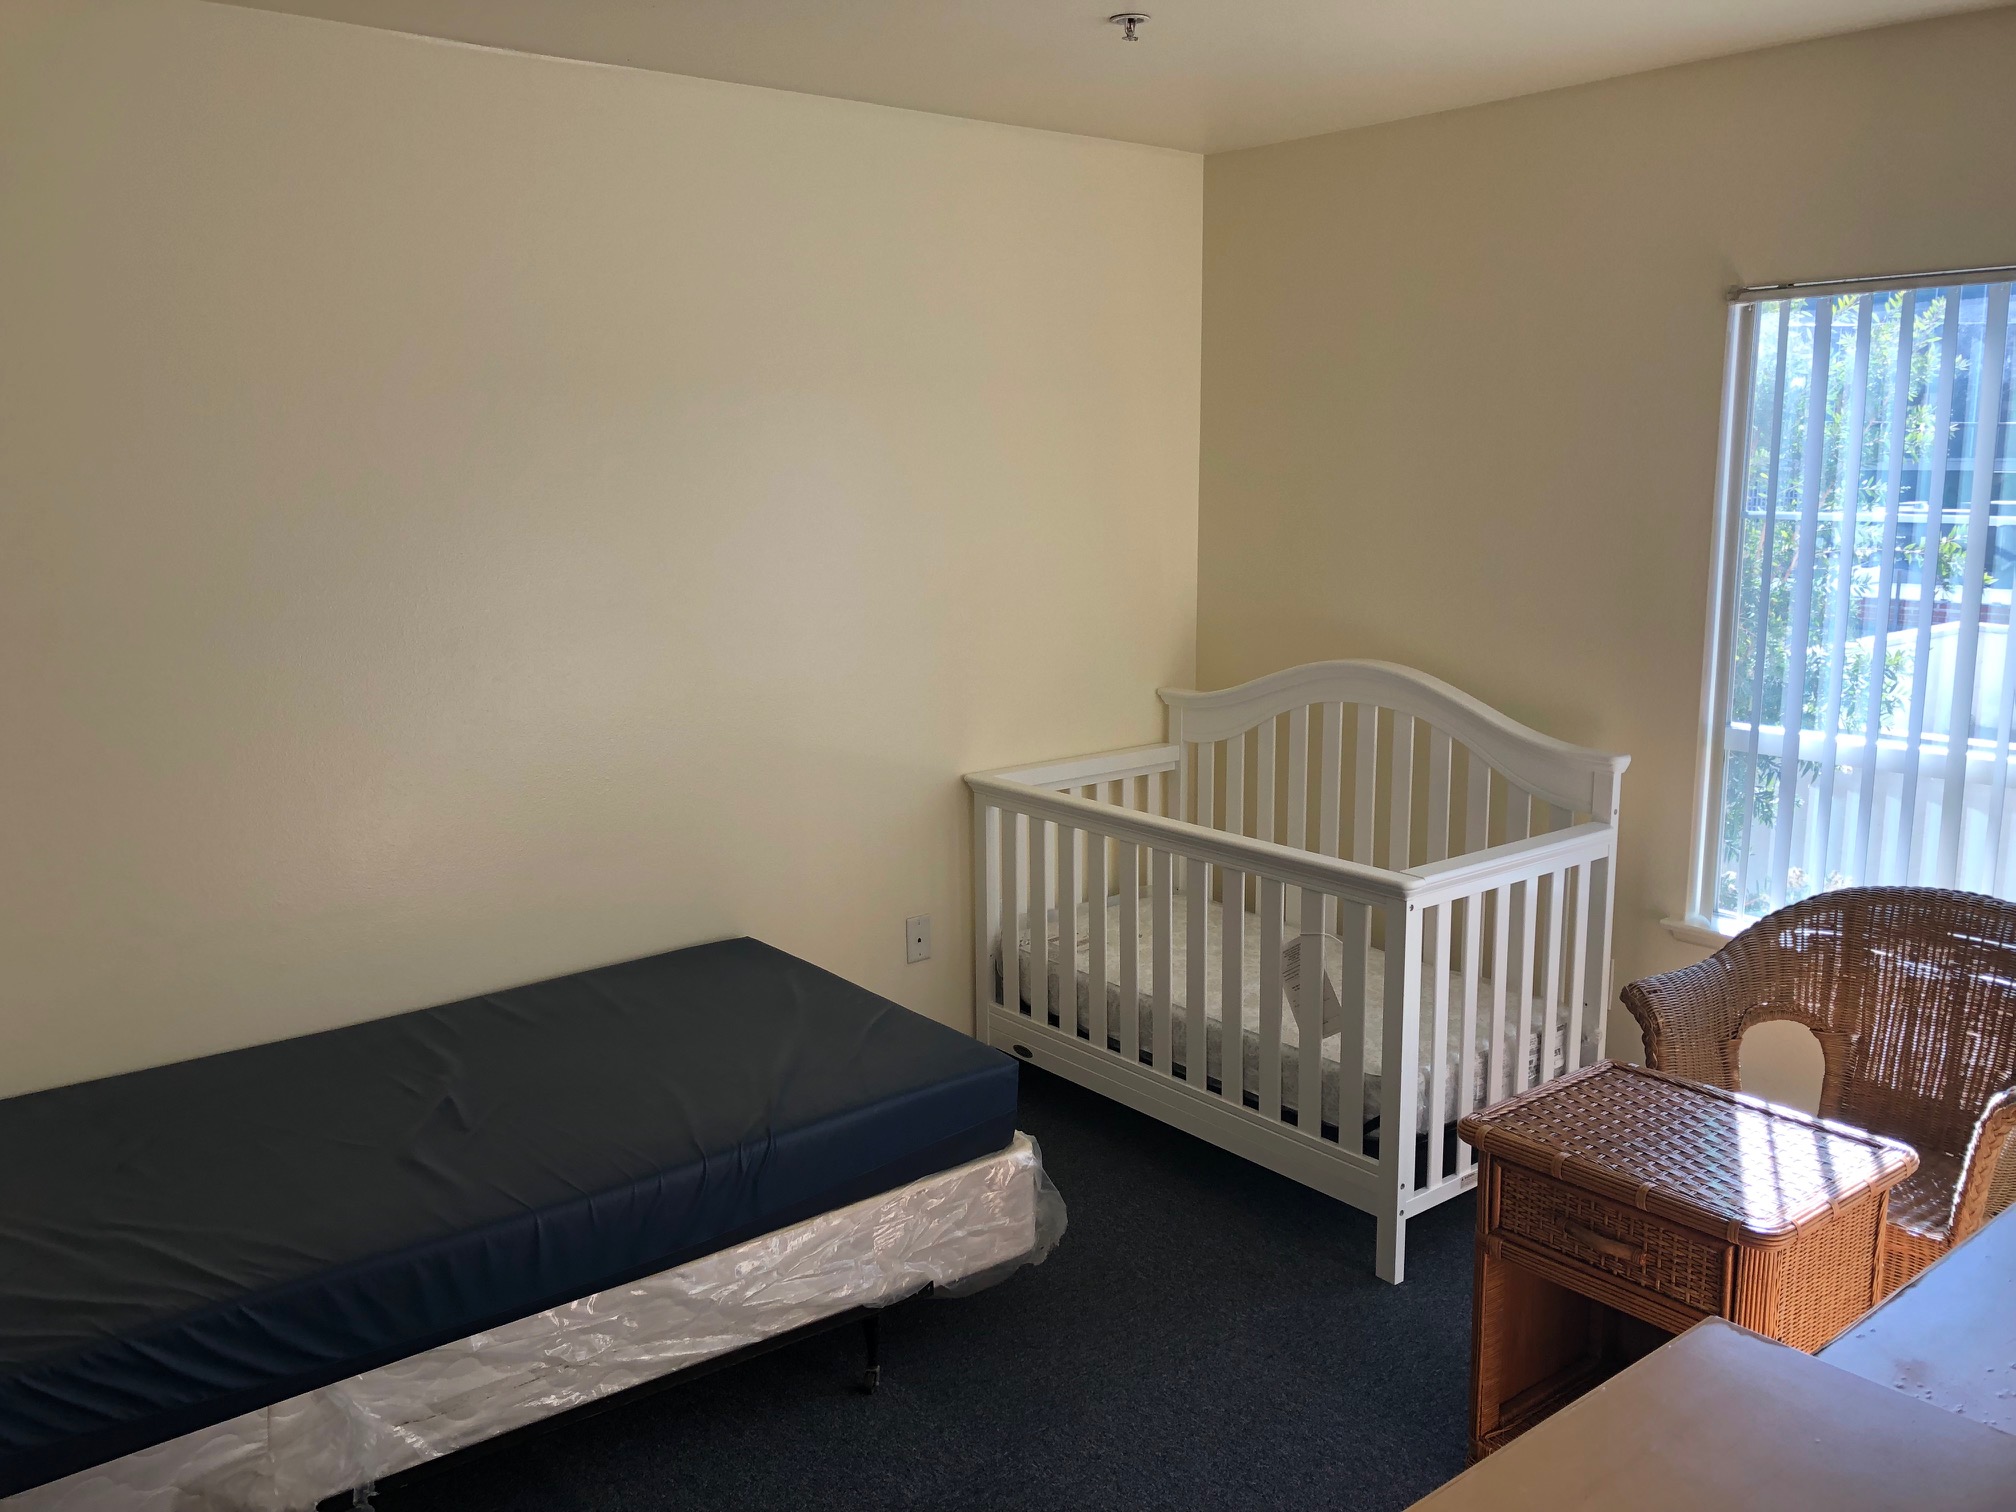 Bogen 2 Bedroom with twin bed and baby crib near the foot of the bed.  Wicker table and chair set near the window